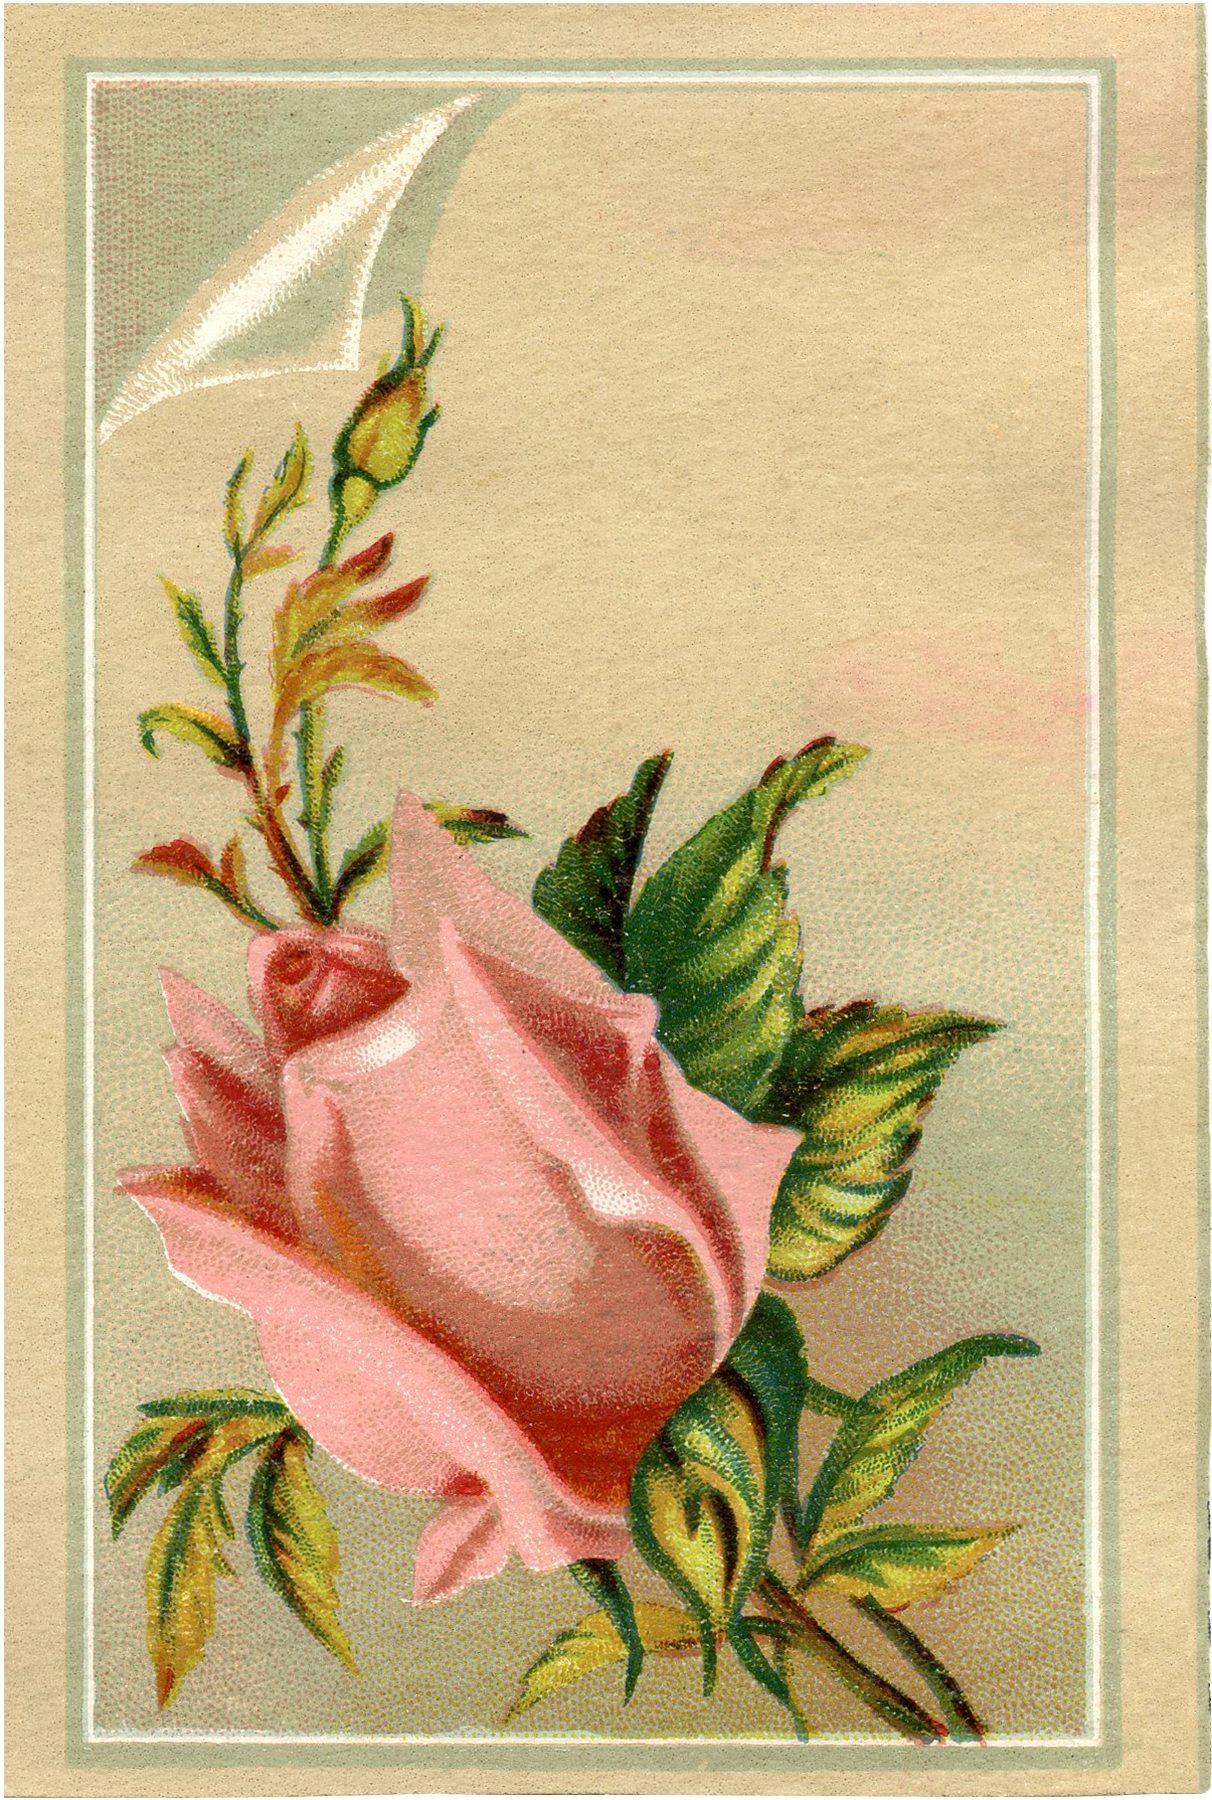 Free Pink Rosebud Download - Pretty! - The Graphics Fairy